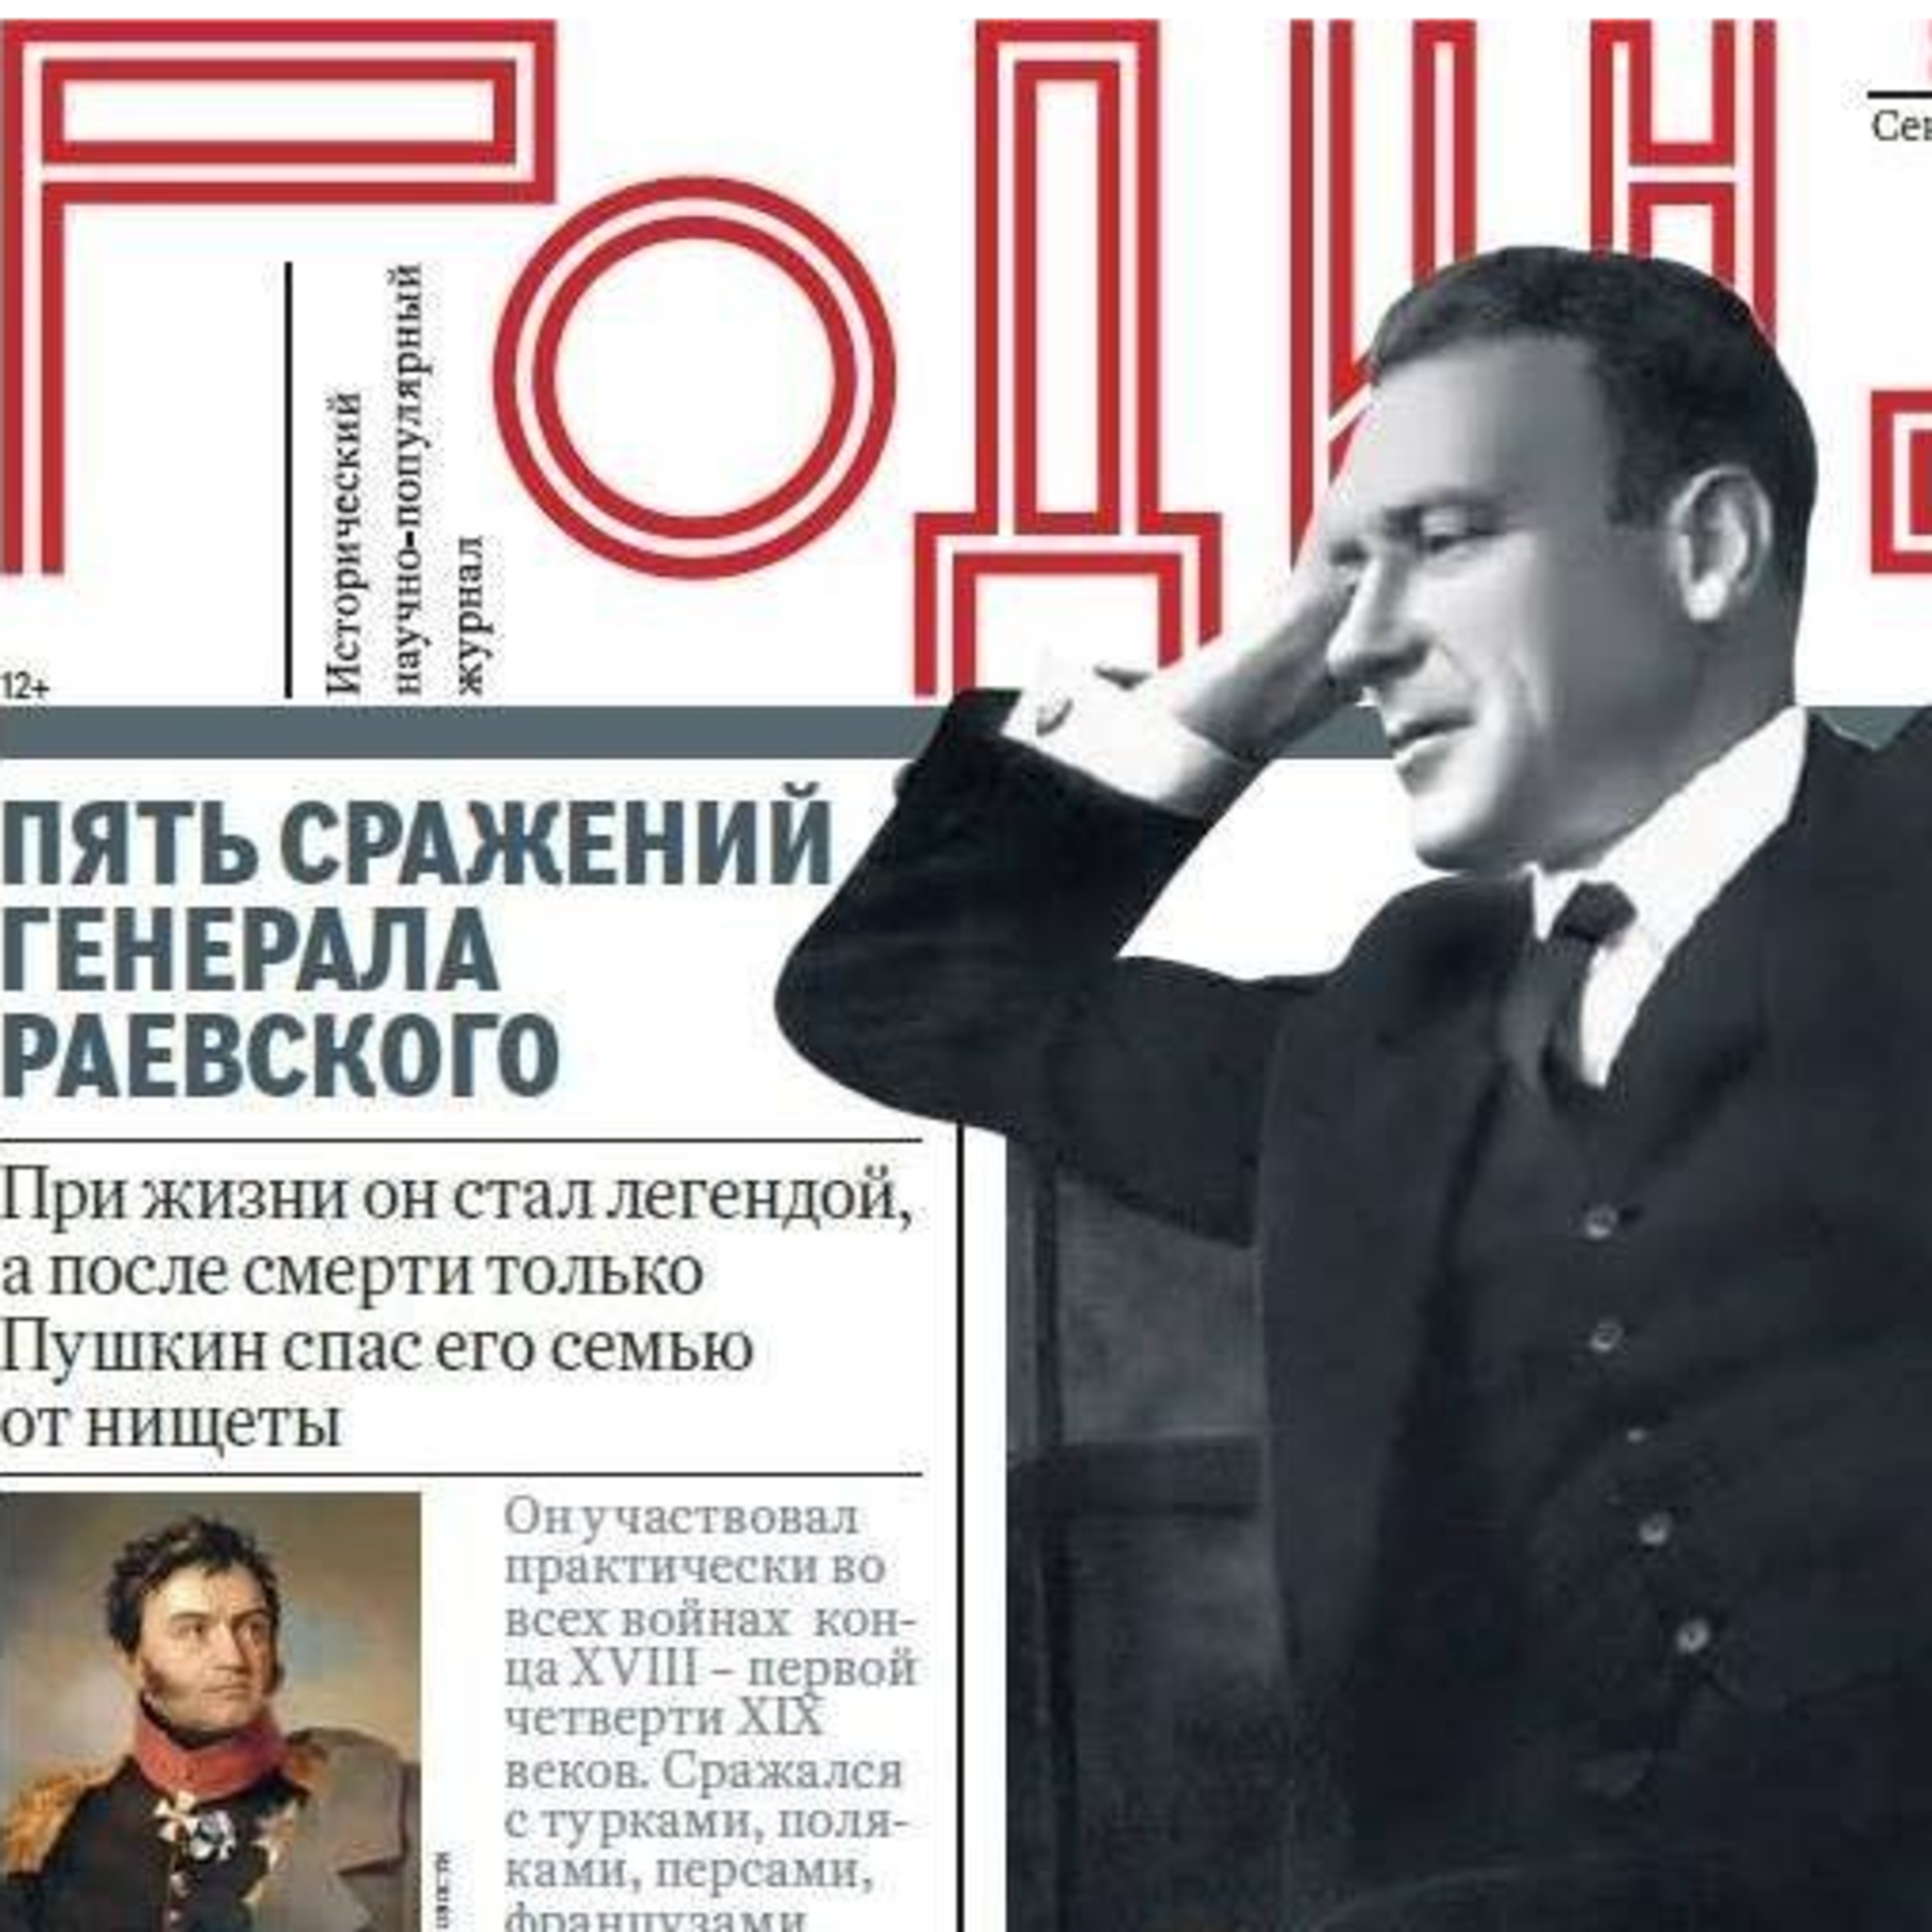 The exhibition Year of the magazine Rodina. 2016: historical events in people’s stories